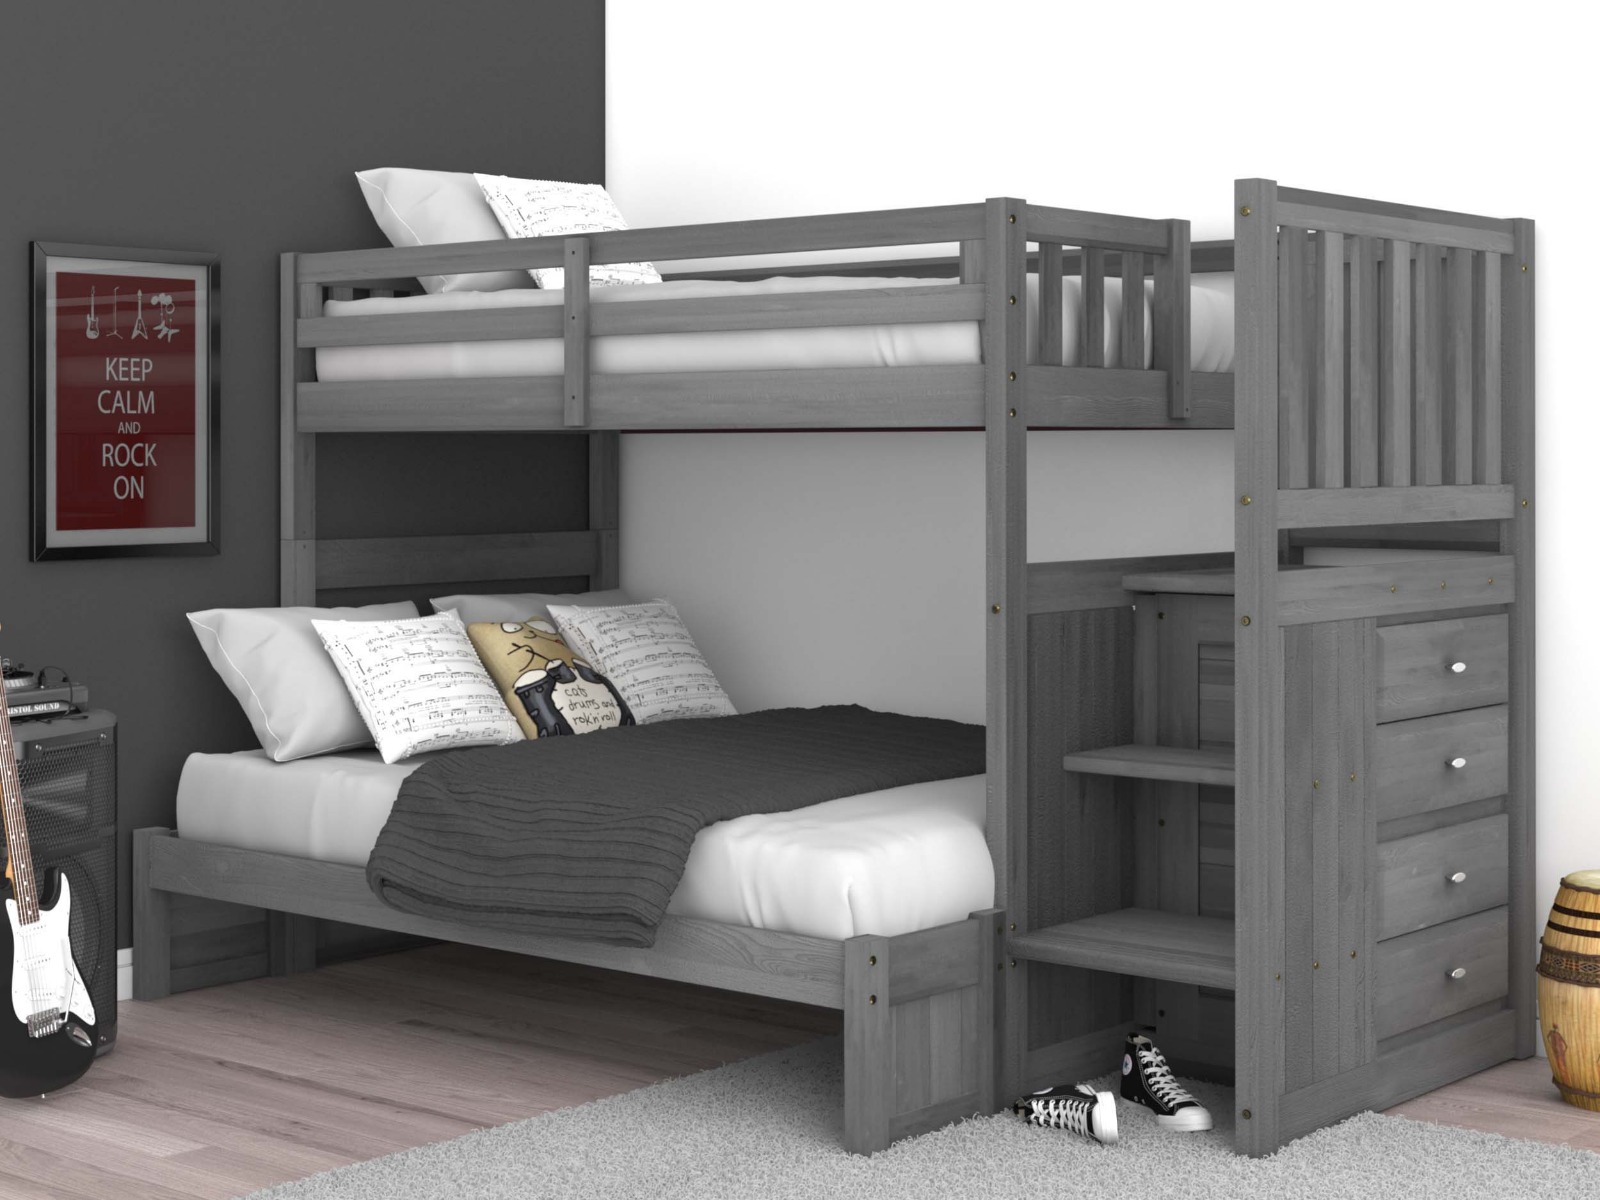 Full Staircase Bunk Bed Charcoal Gray, Discovery Twin Over Full Bunk Bed